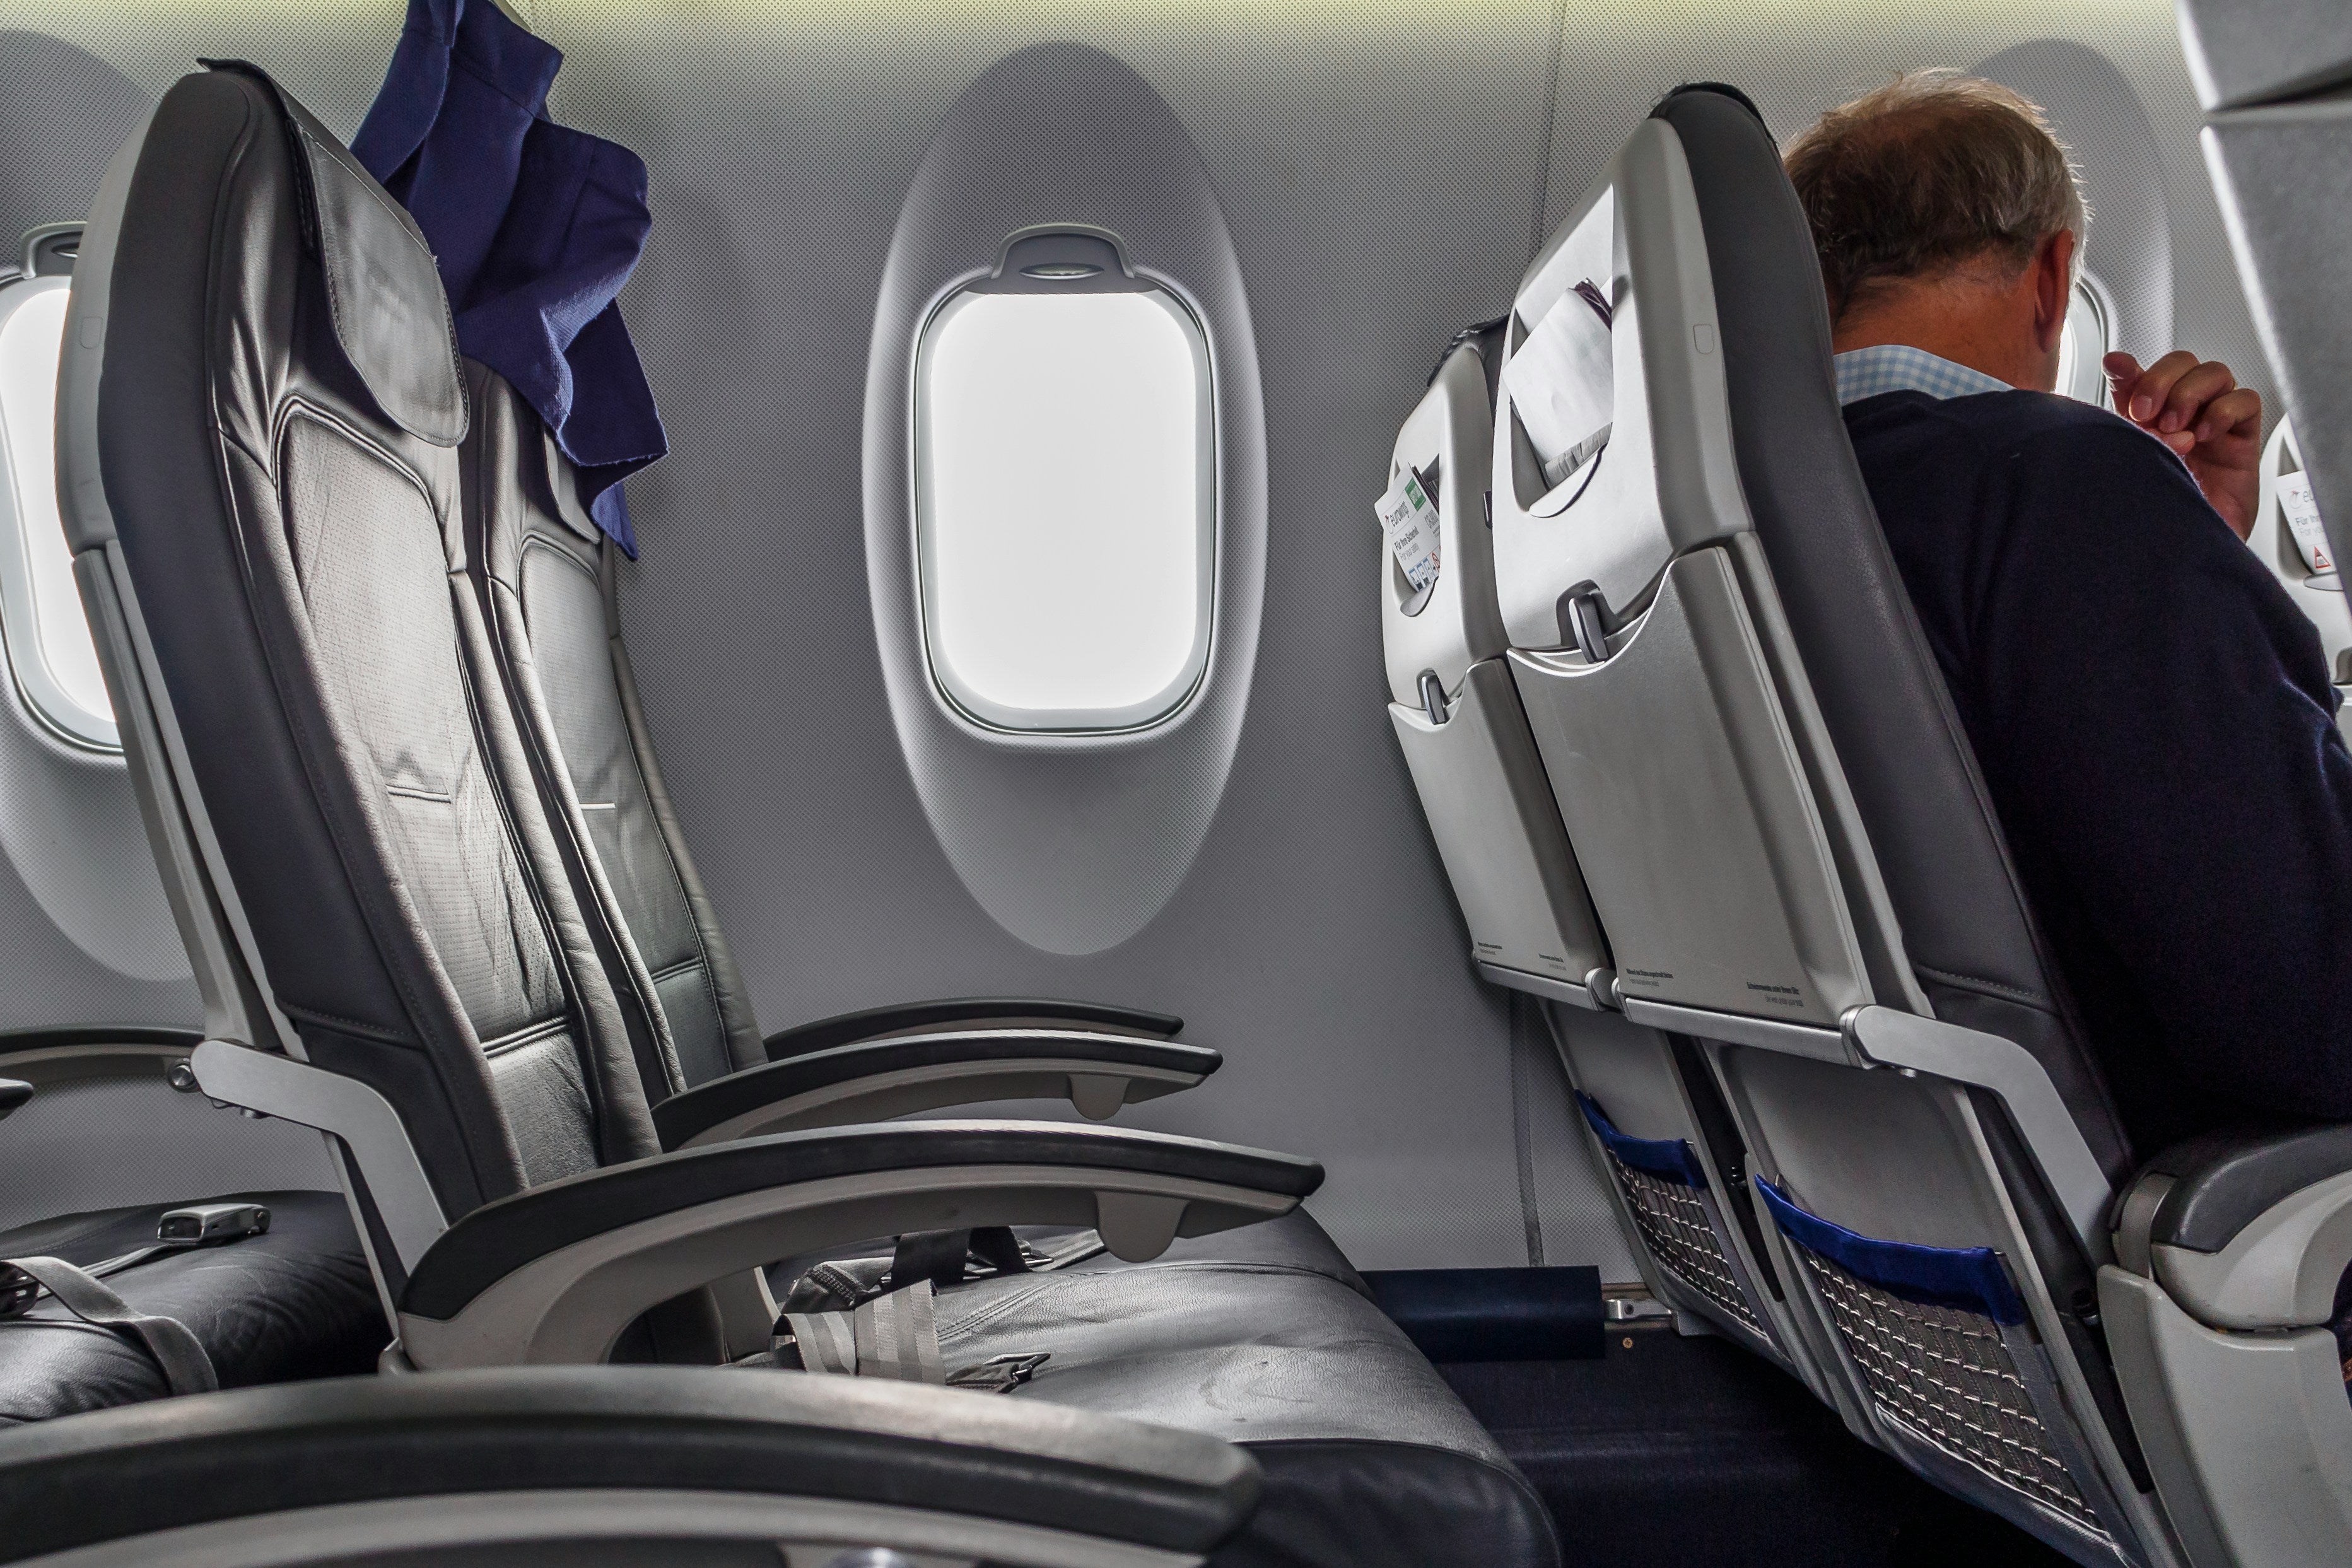 The rules outlined that no person could use two armrests – even the passenger in the middle seat